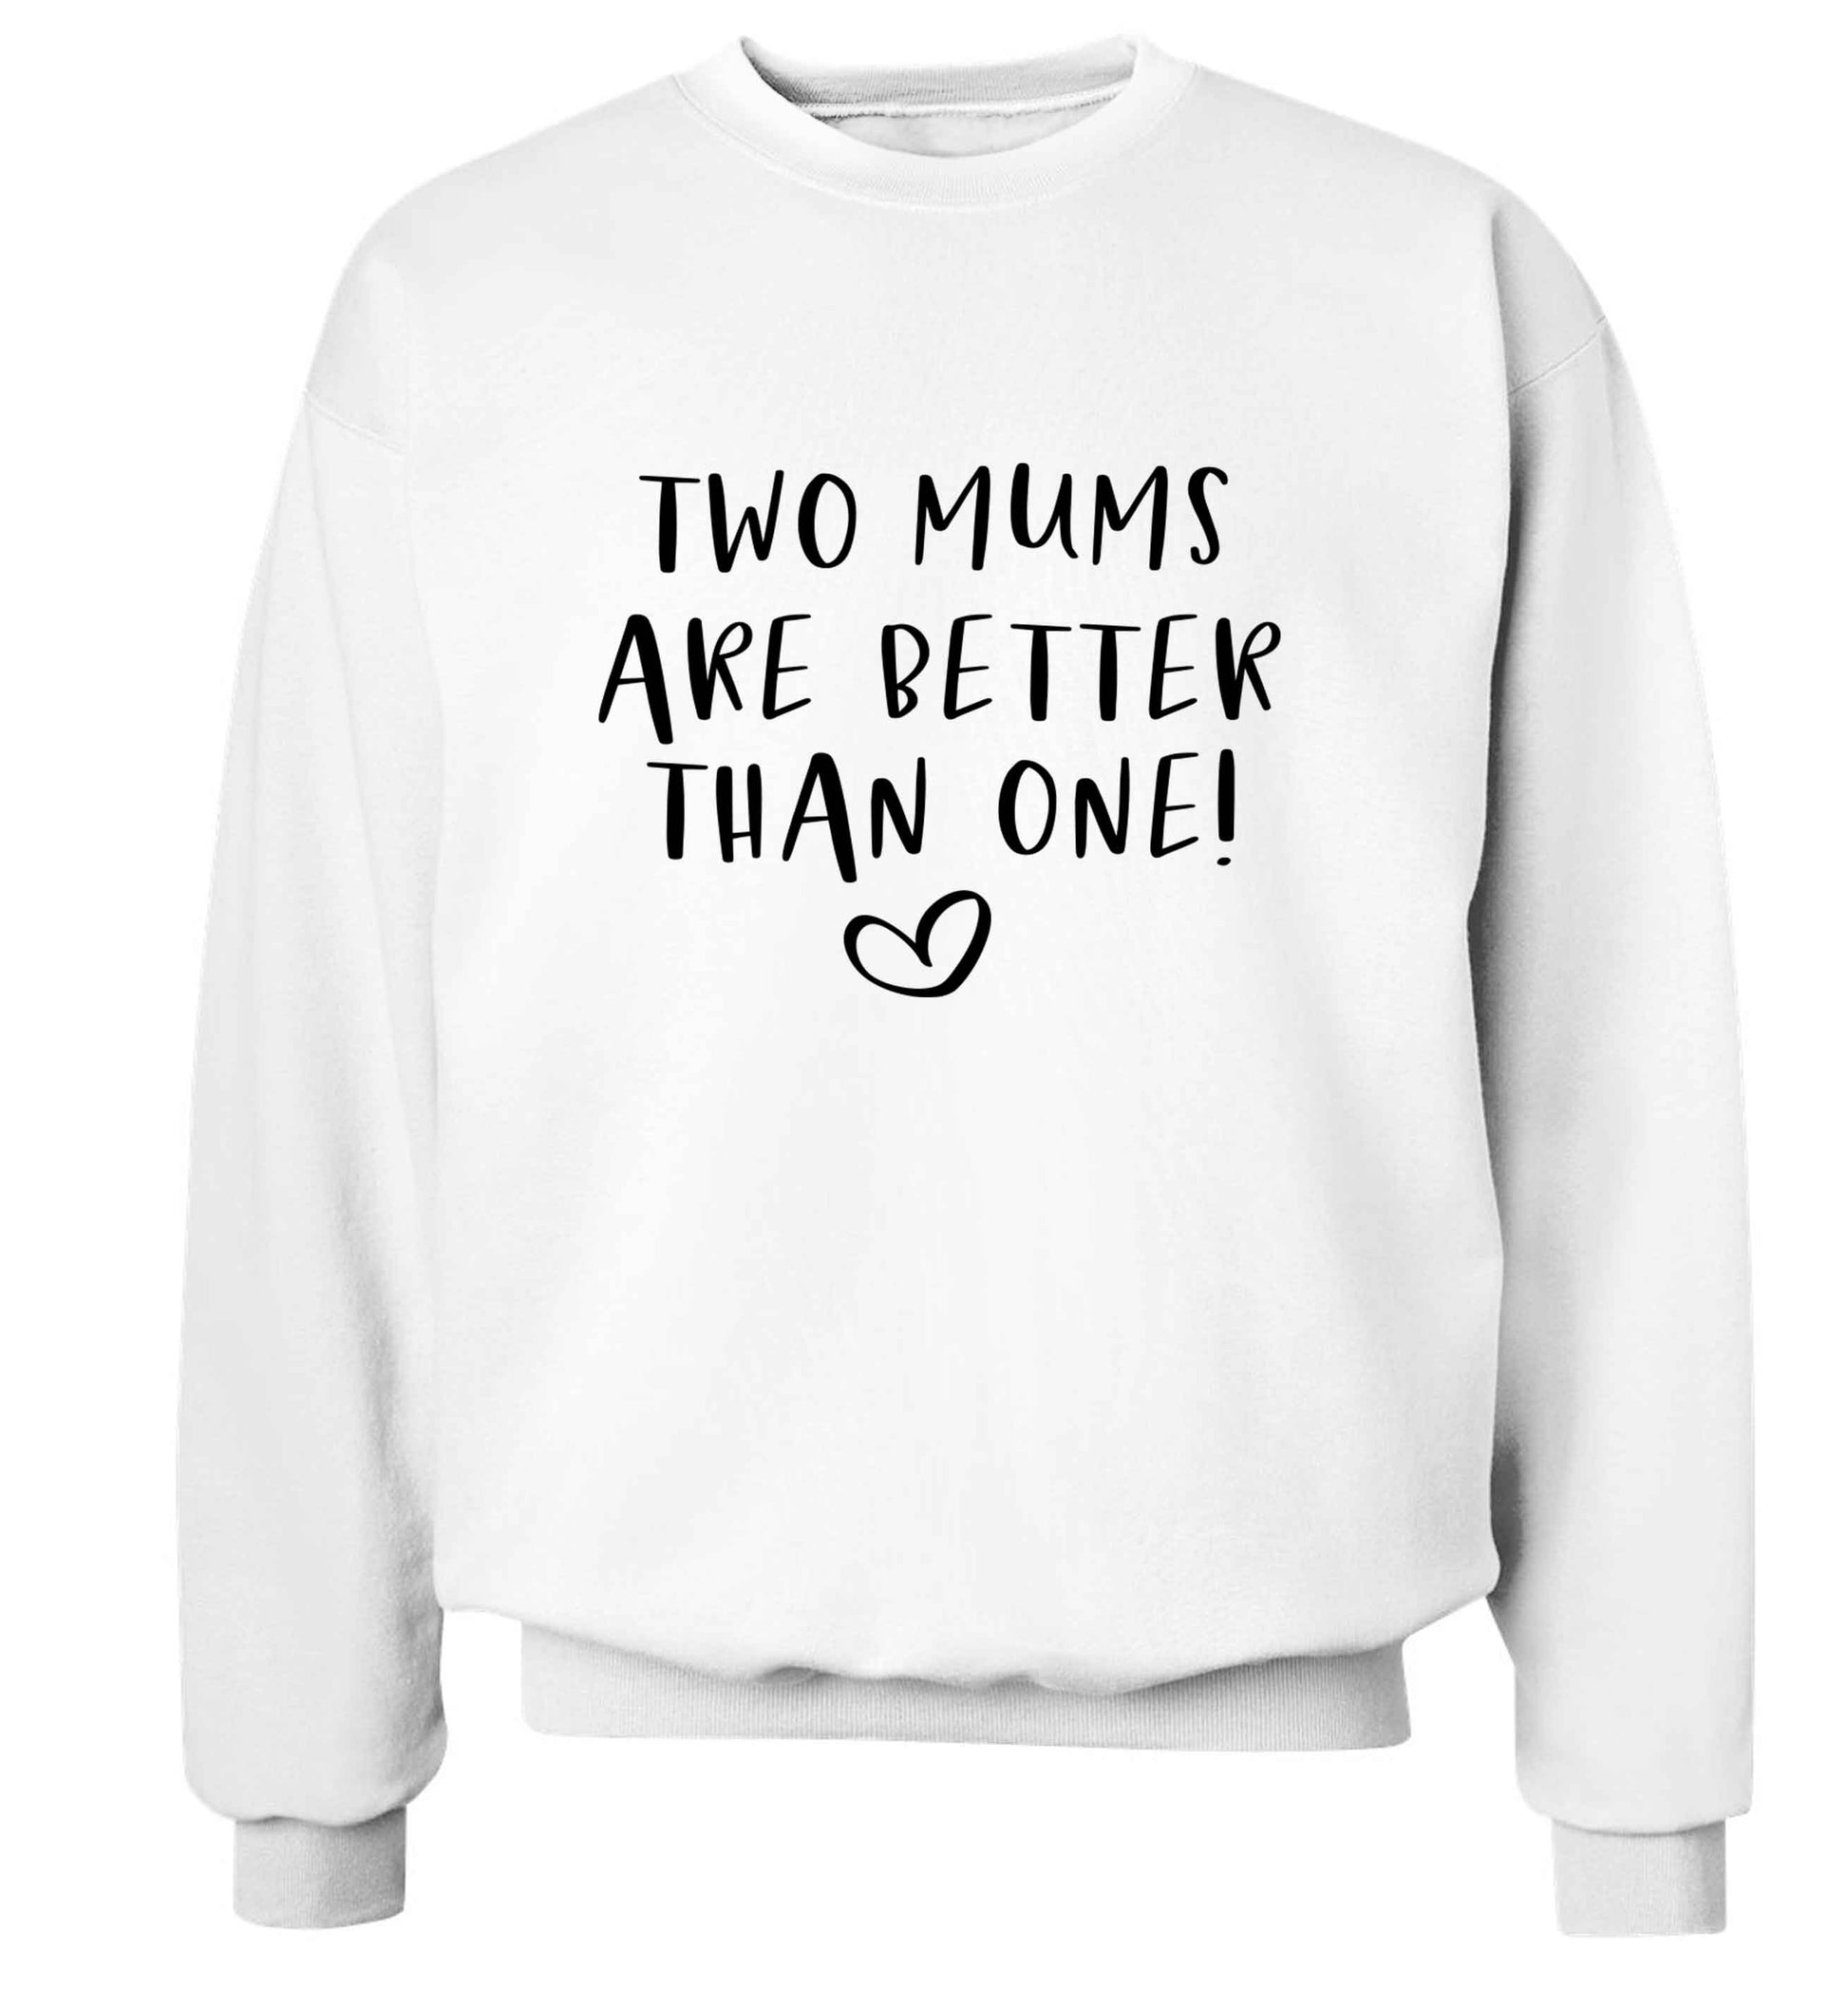 Two mums are better than one adult's unisex white sweater 2XL